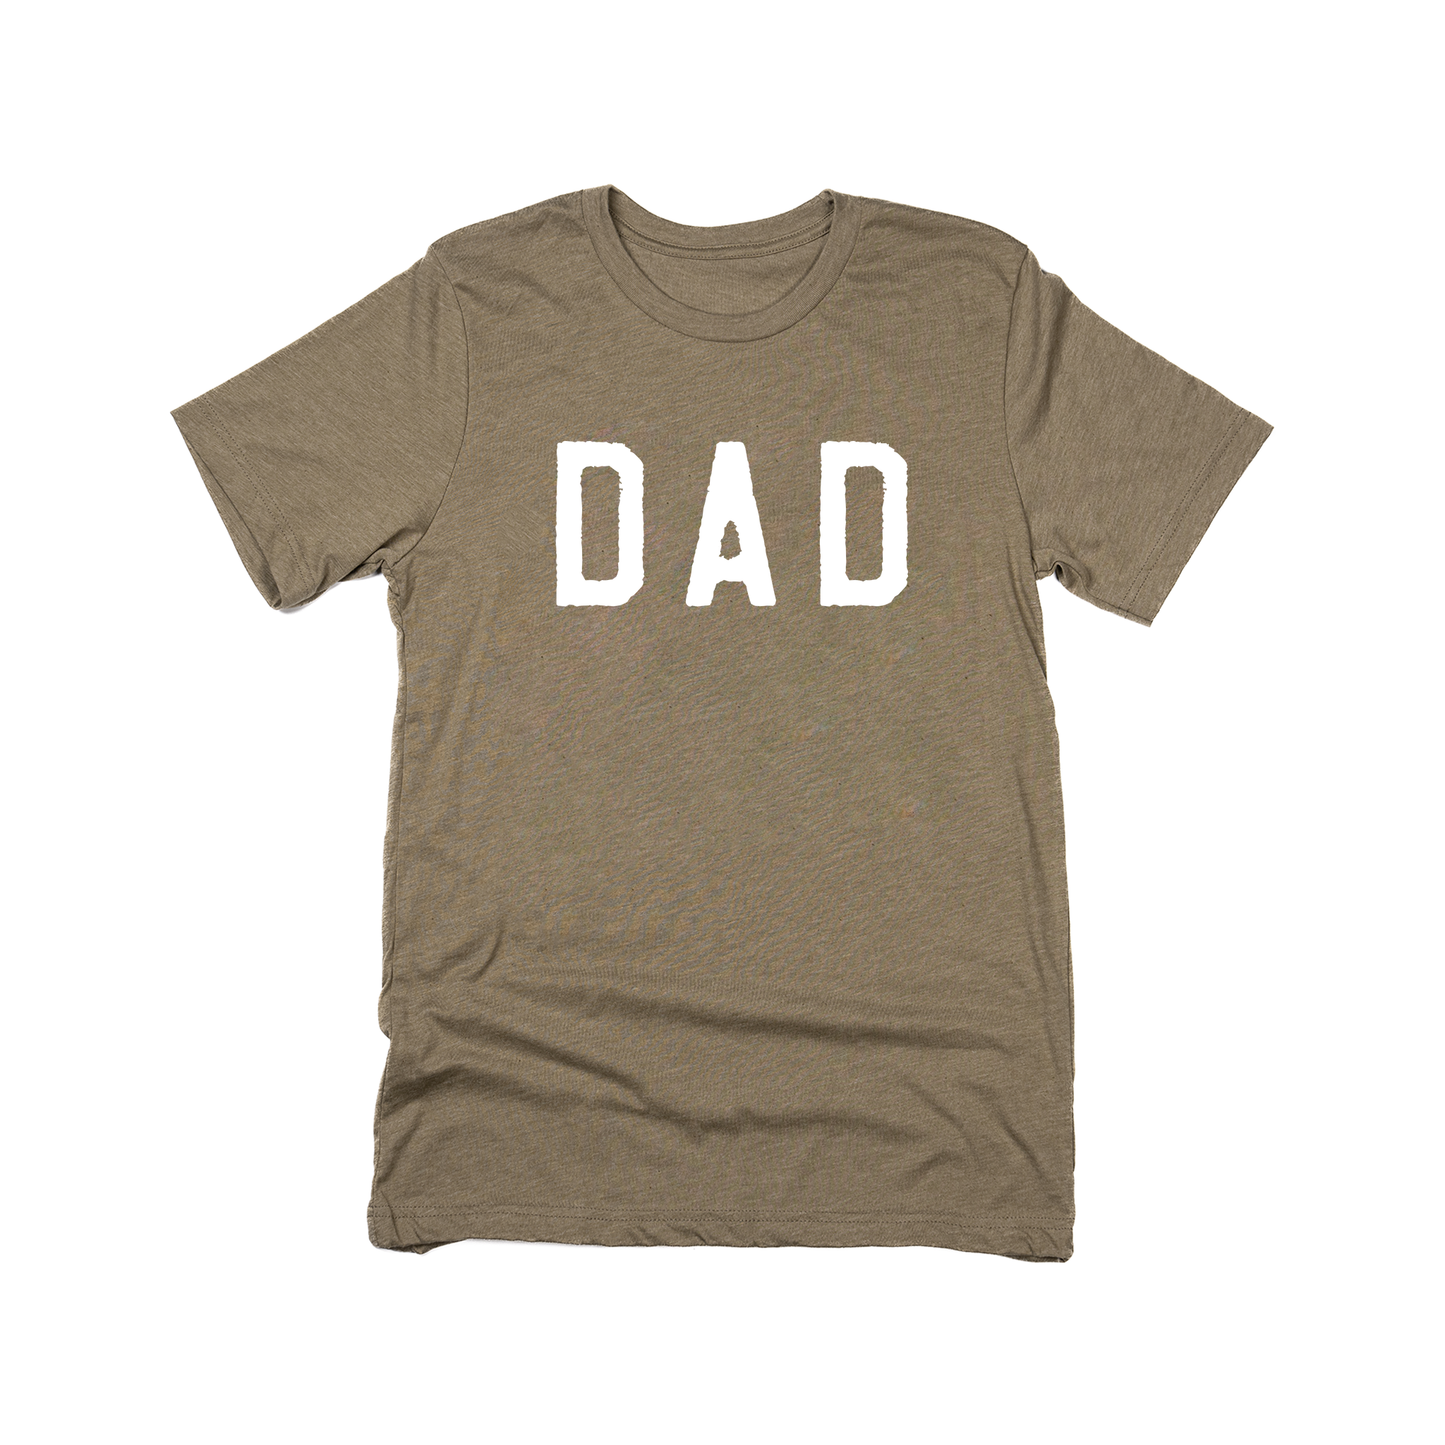 Dad (Rough, White) - Tee (Olive)